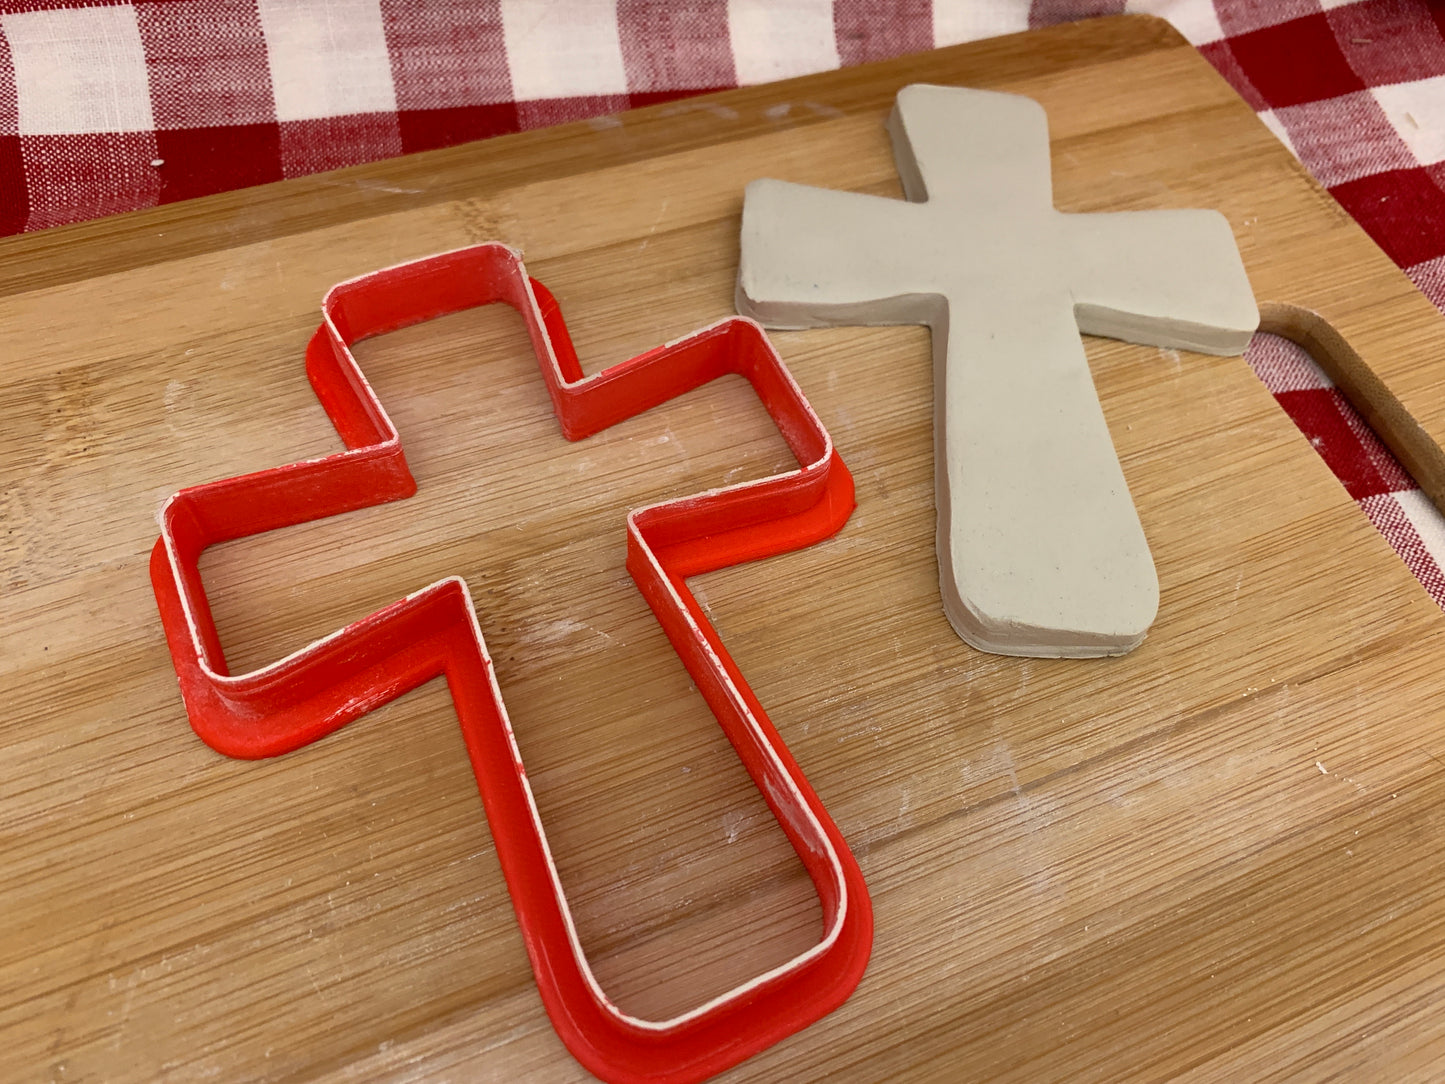 Cross, Clay Cutter - plastic 3D Printed, pottery tool, multiple sizes